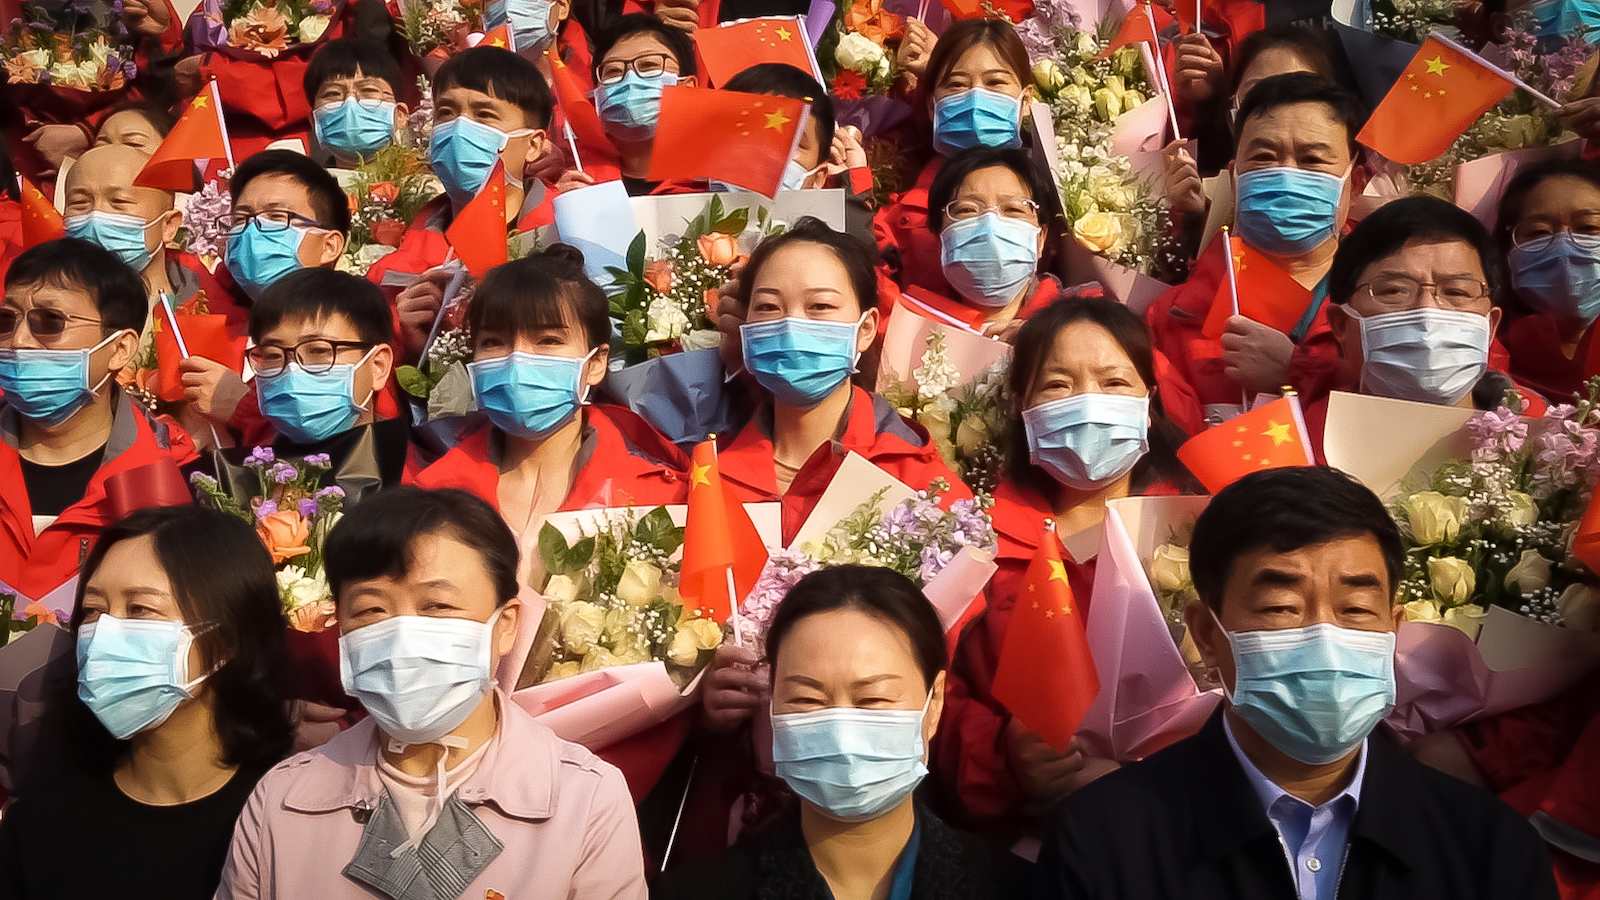 A crowd of face-masked people in China look towards the camera, many holding flowers and wearing red.